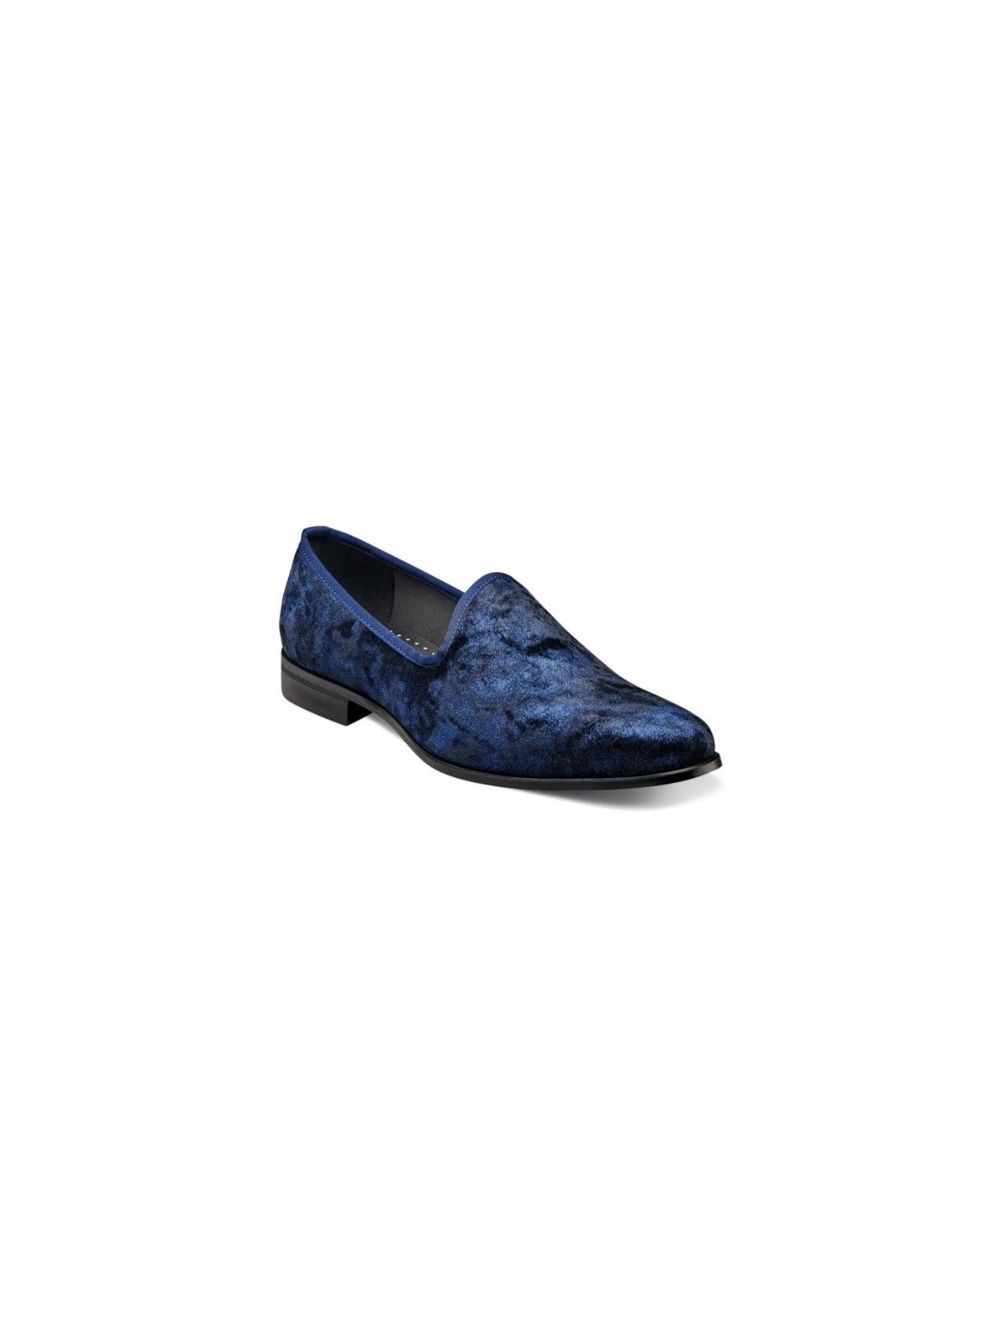 stacy adams sultan loafer